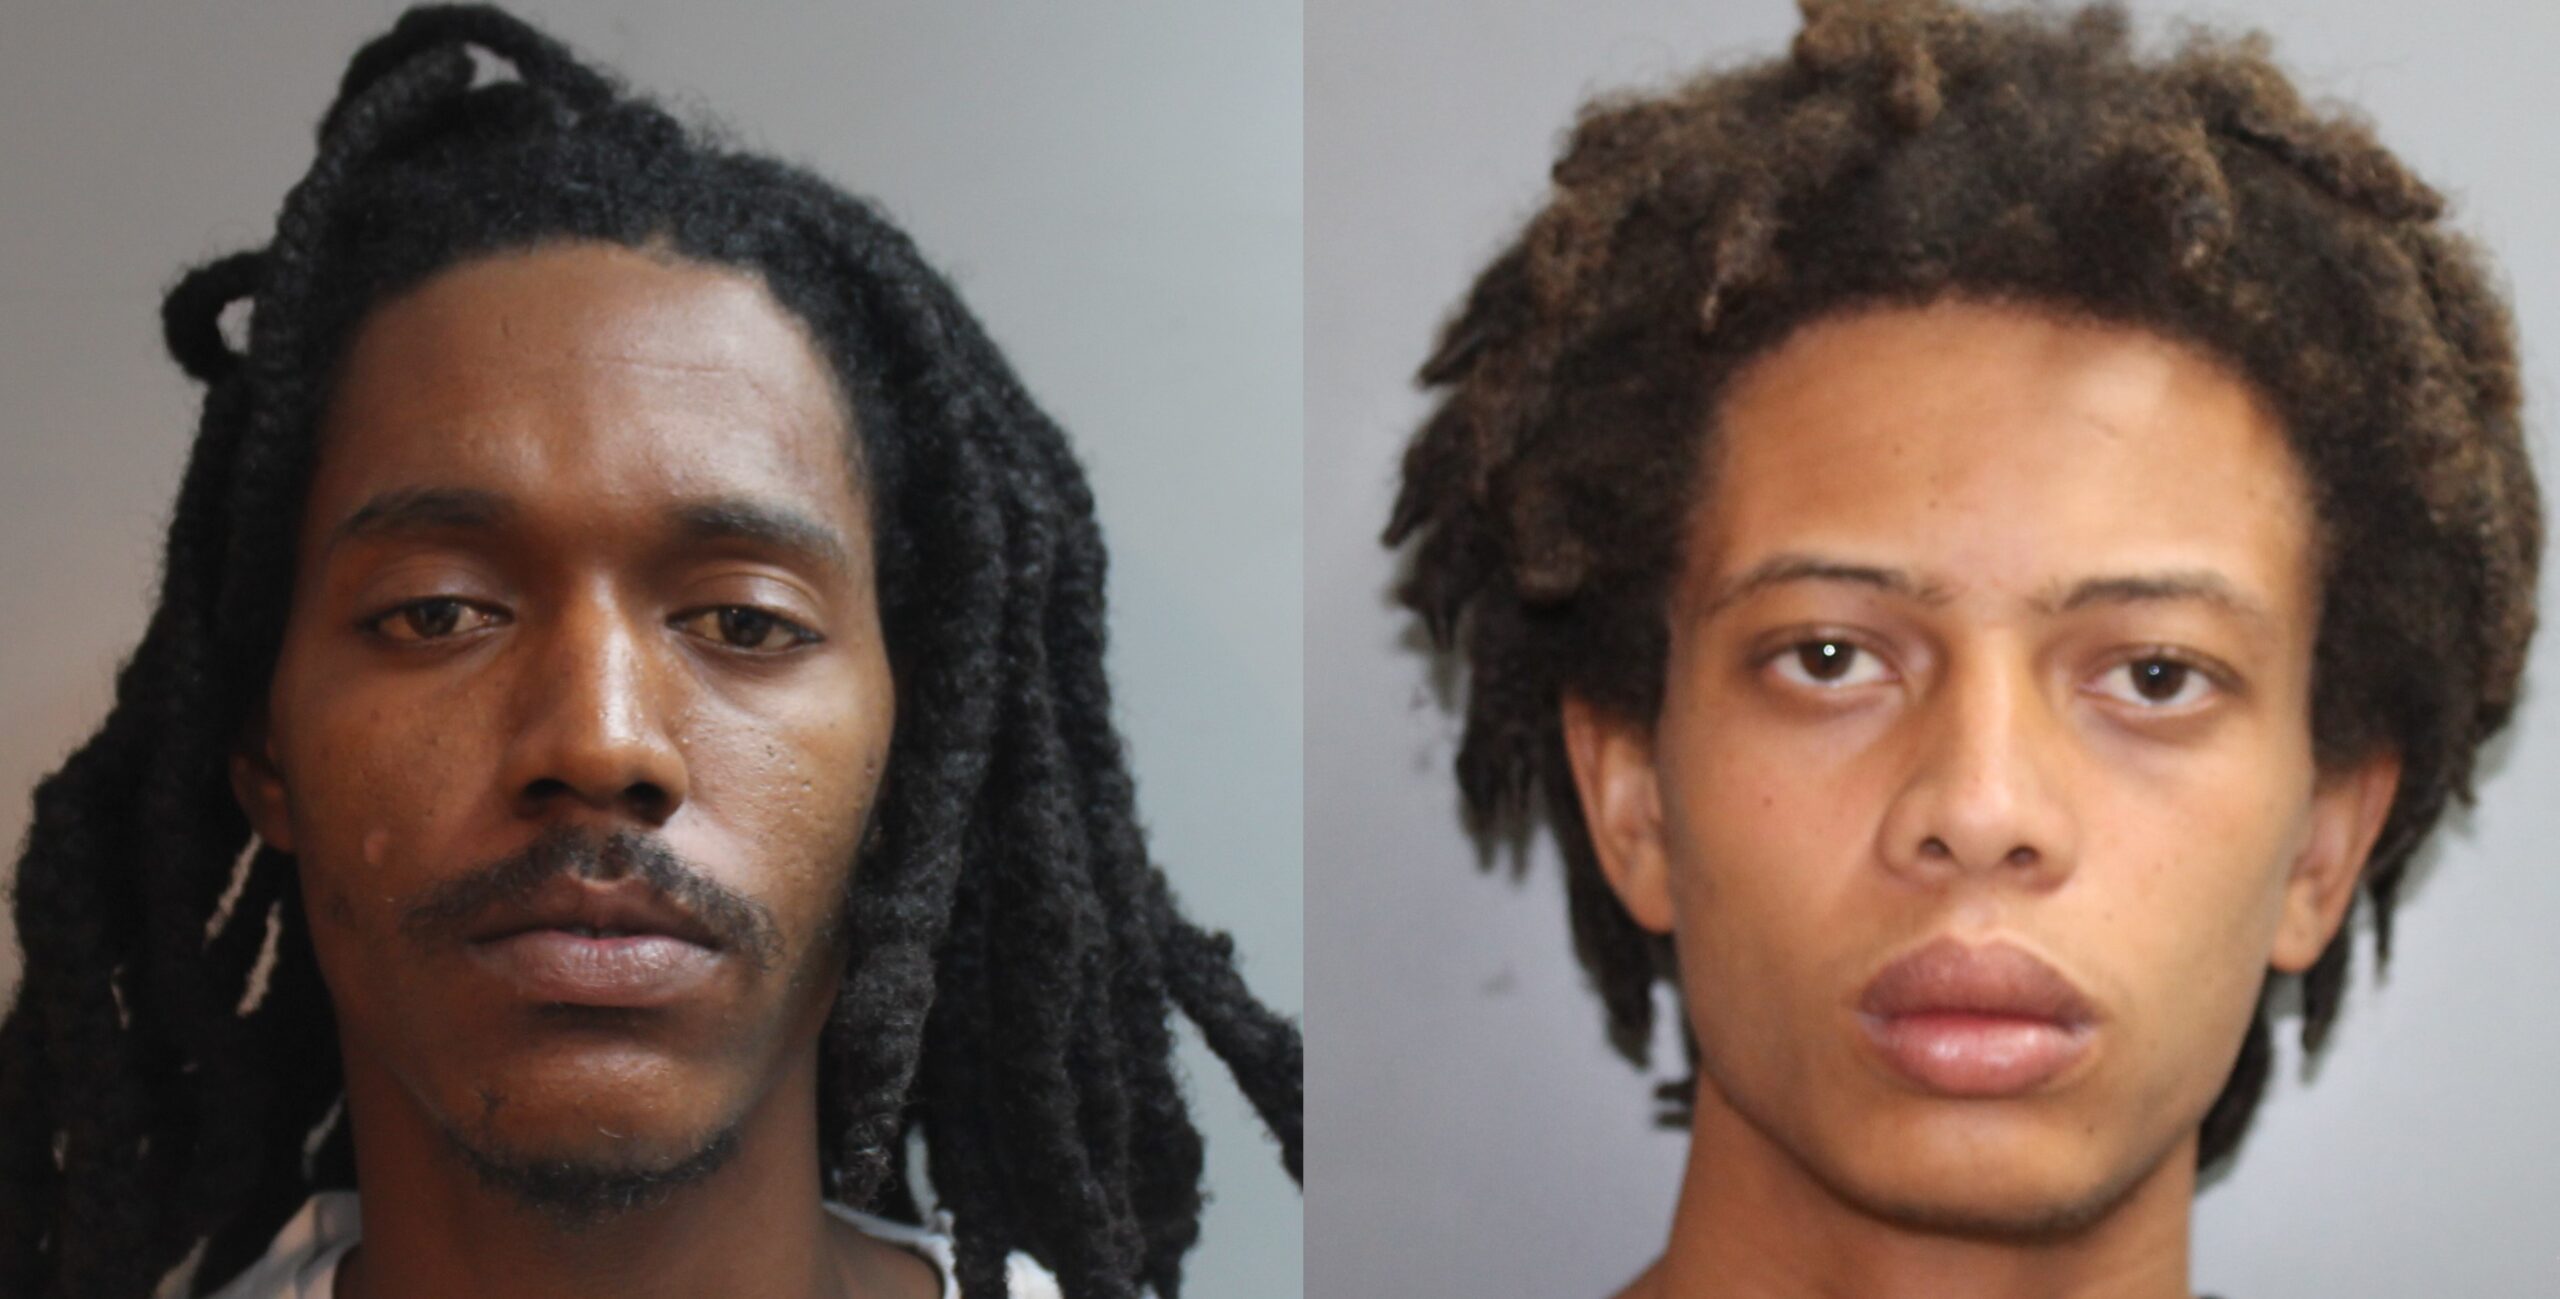 Two St. Croix Men Arrested On Drugs, Guns Charges After Routine Traffic Stop